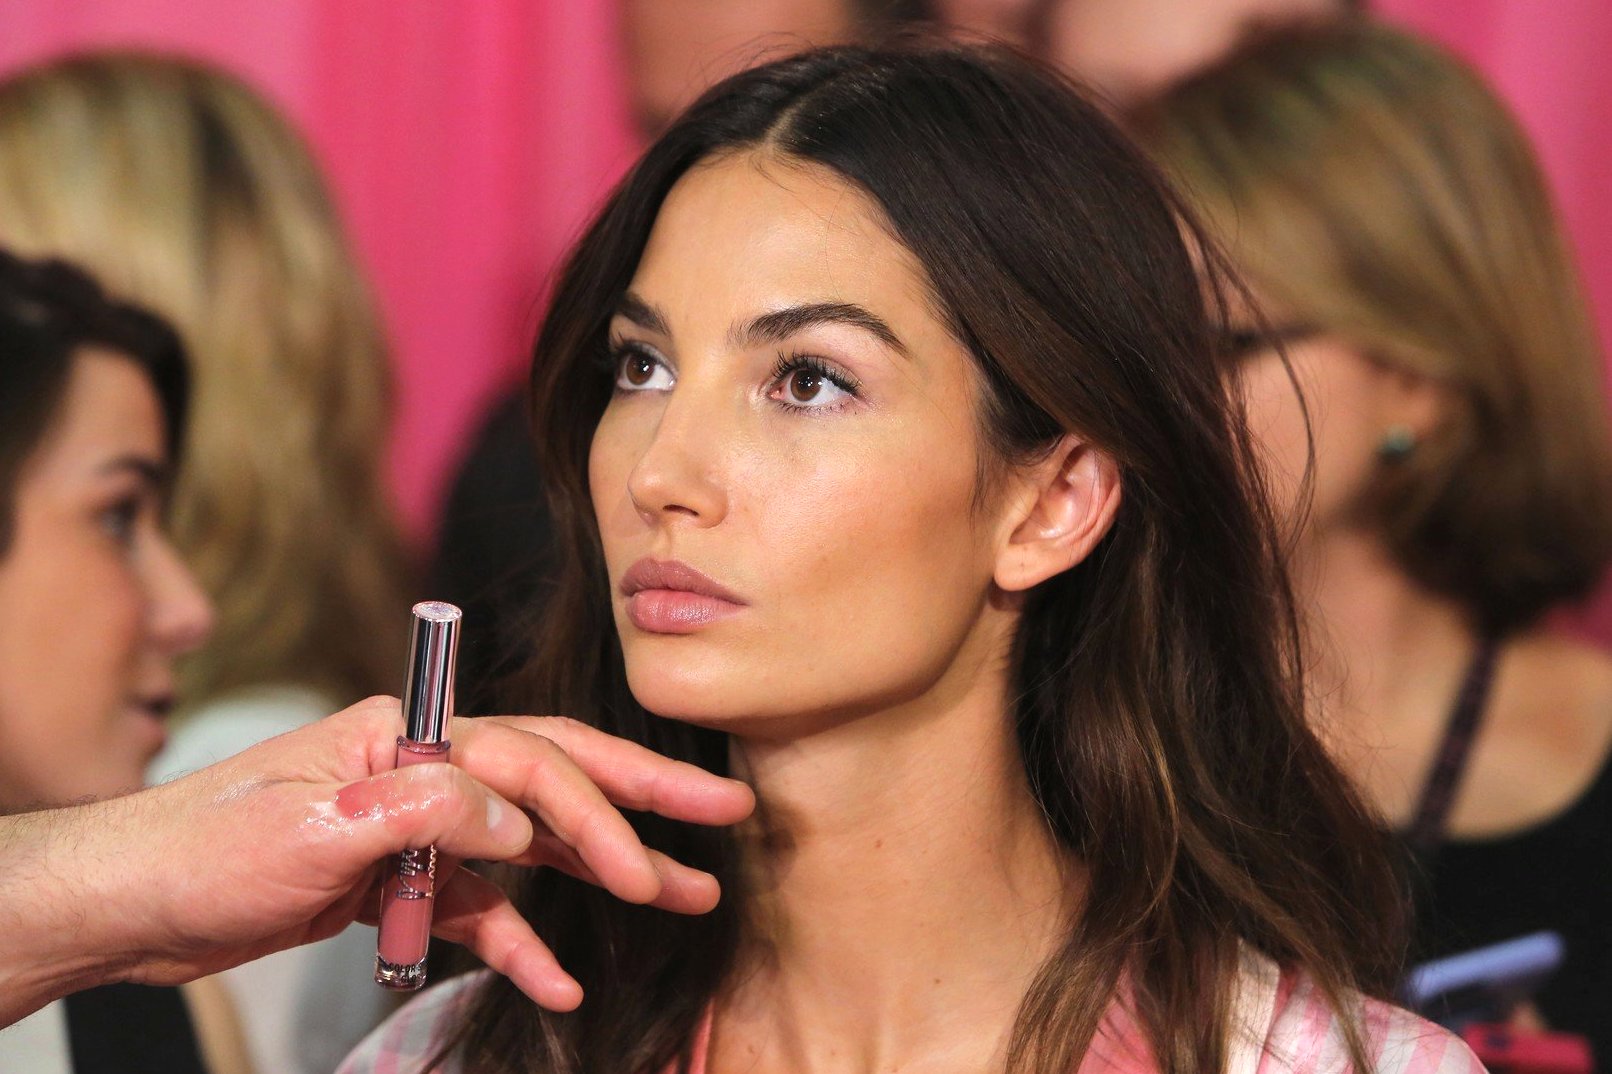 November 10 2015, New York City Model Lily Aldridge poses backstage prior to the 2015 Victoria's Secret Runway Show on November 10 2015 in New York City. The show will broadcast on December 8 2015 on CBS. By Line: Philip Vaughan/ACE Pictures ACE Pictures, Inc. tel: 646 769 0430 Email: info@acepixs.com, Image: 265680089, License: Rights-managed, Restrictions: , Model Release: no, Credit line: Profimedia, Acepixs